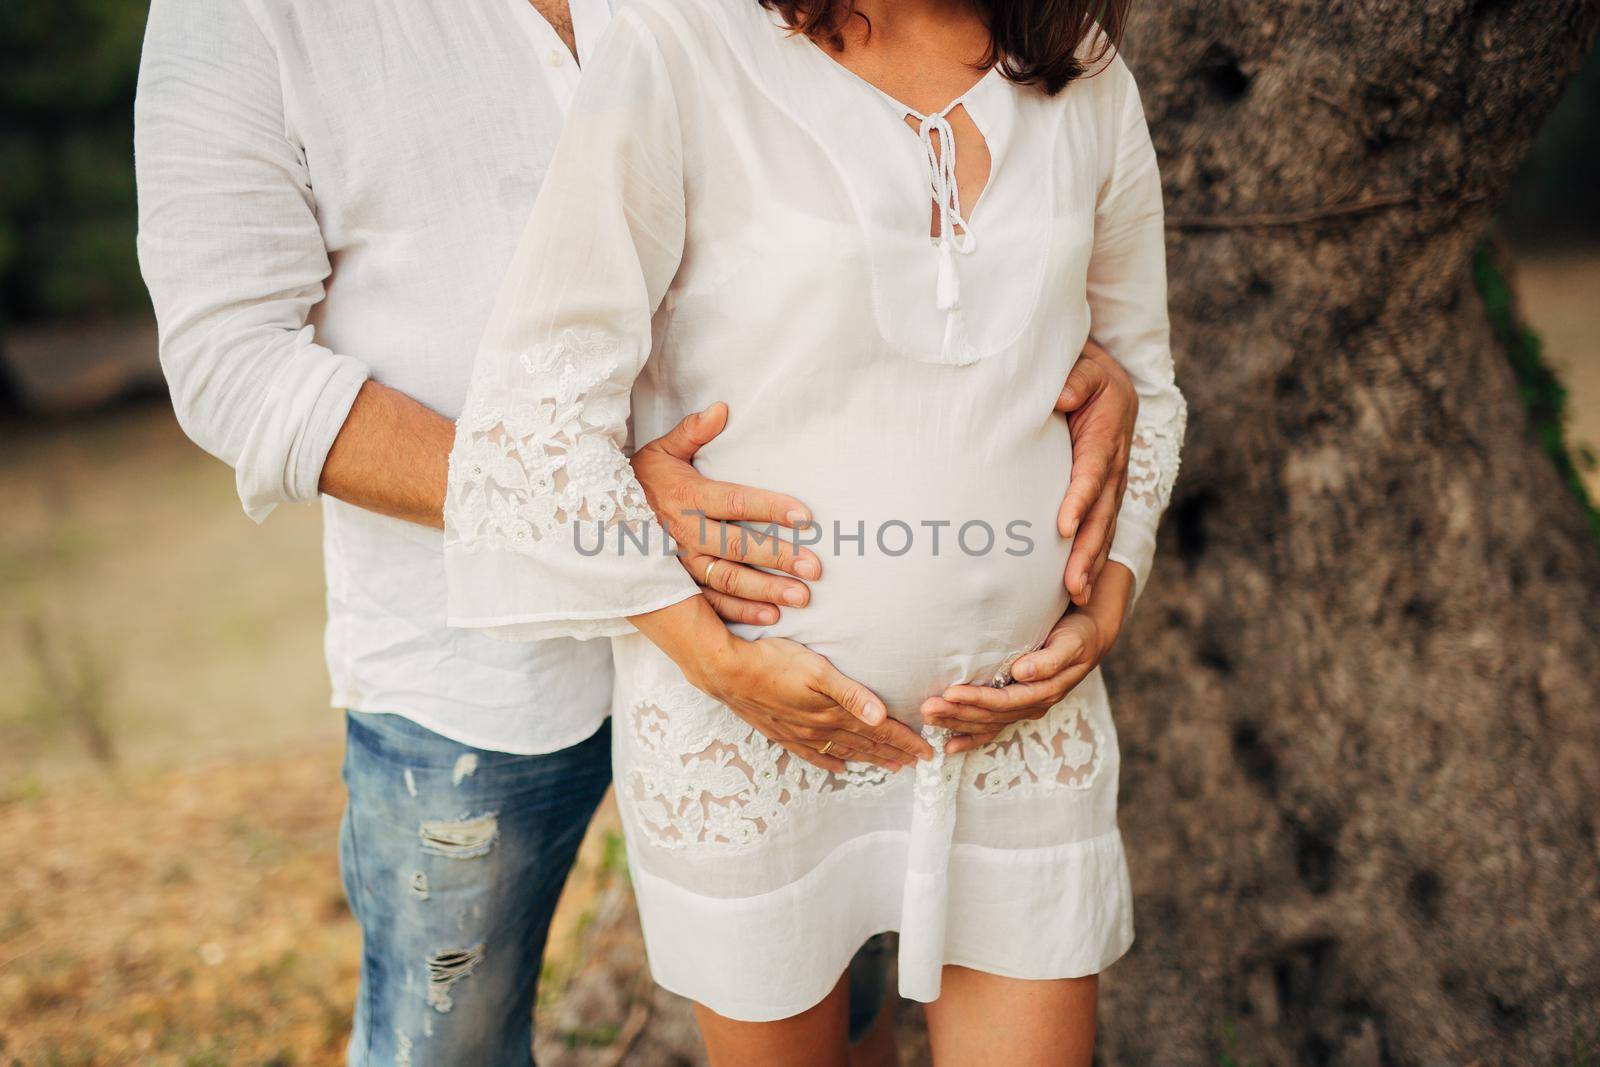 Pregnant woman holding belly with hands in Montenegro